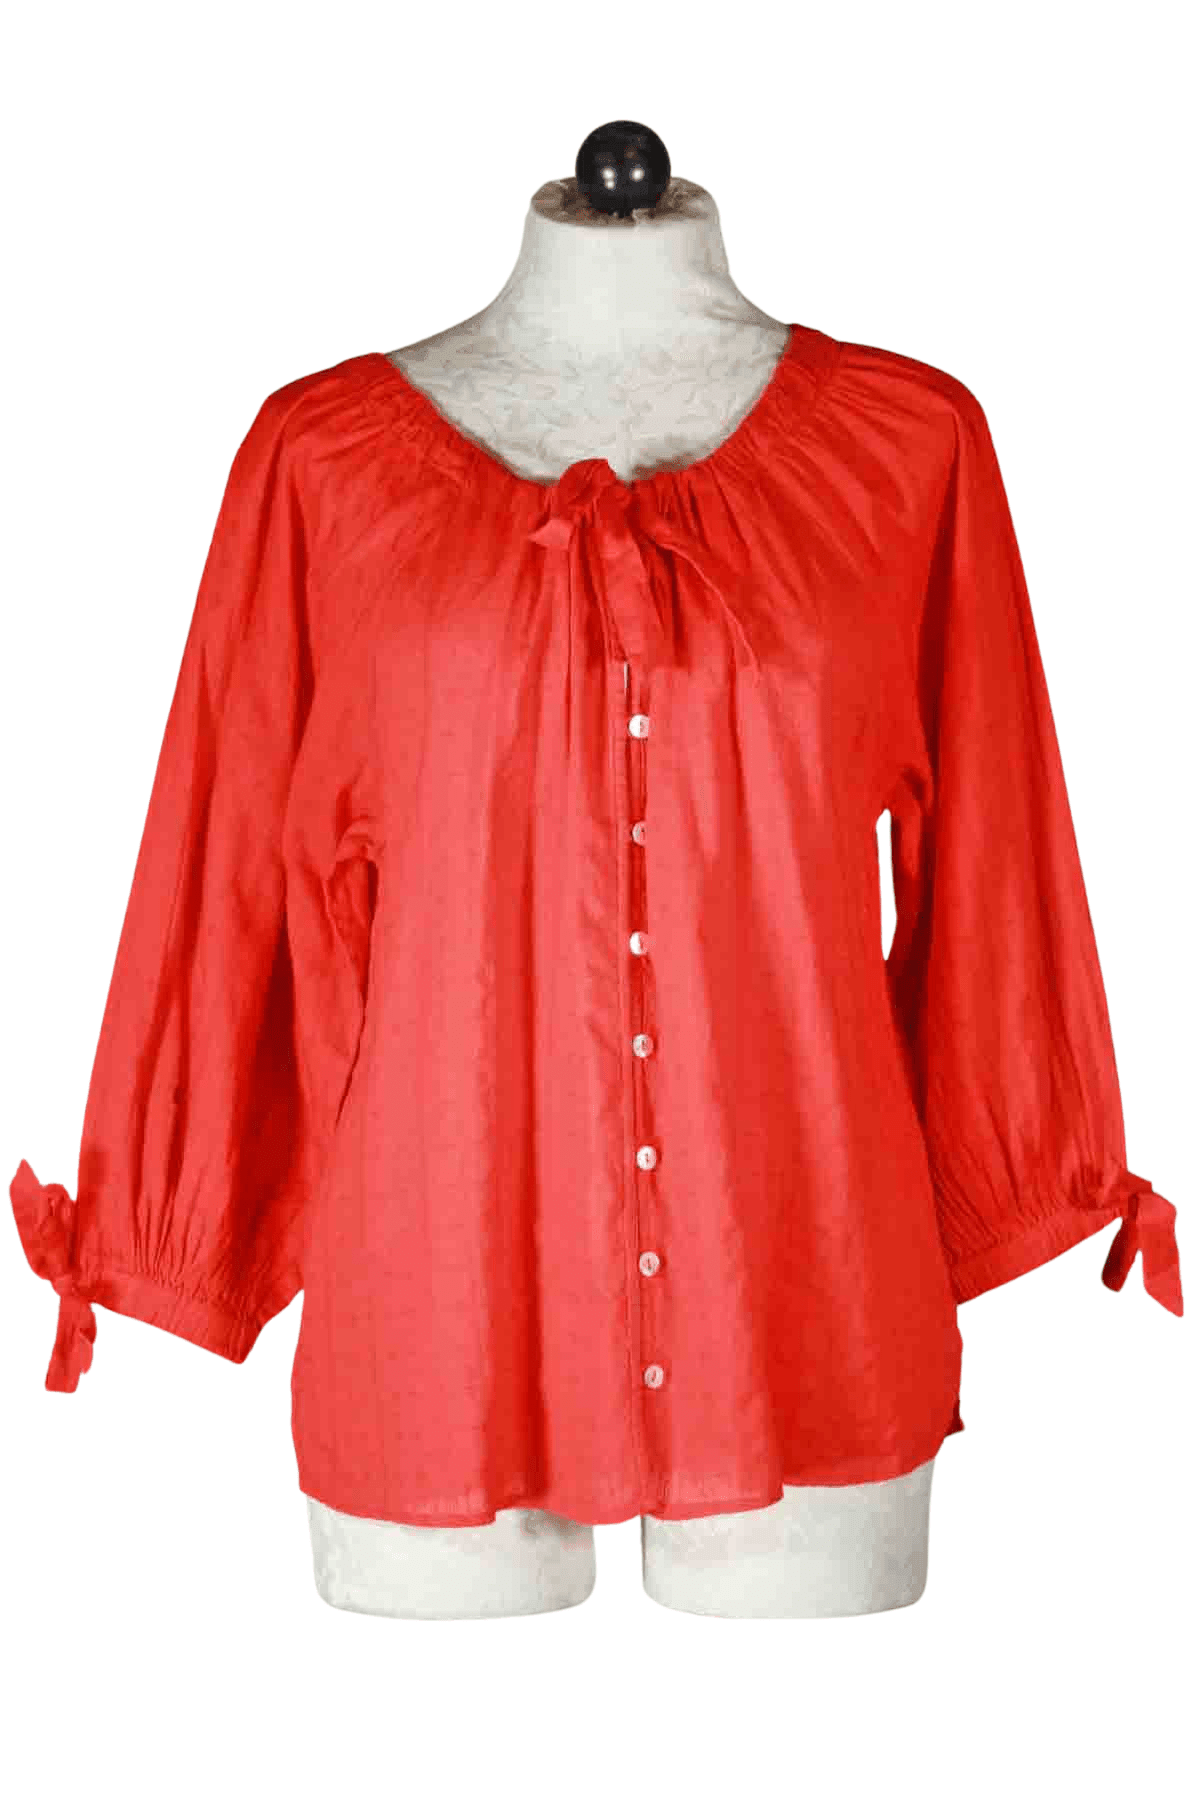 Cherry colored Rylan Blouse by Cleobella